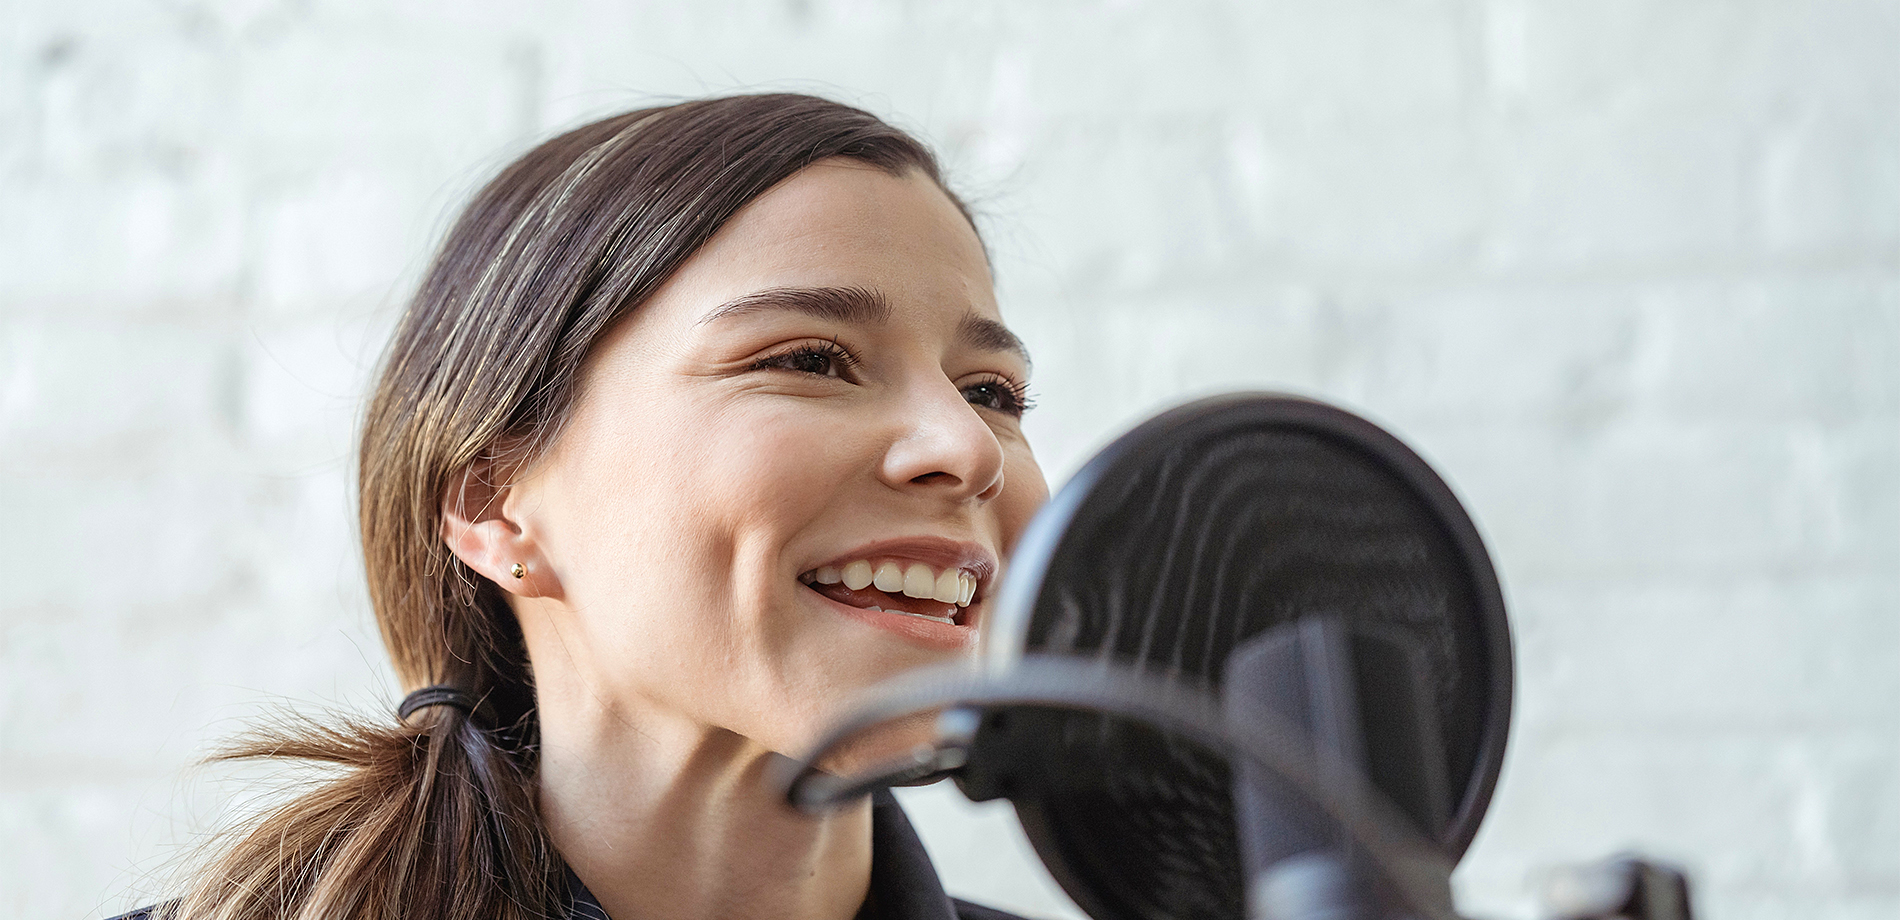 Impress your audience with professional voice training